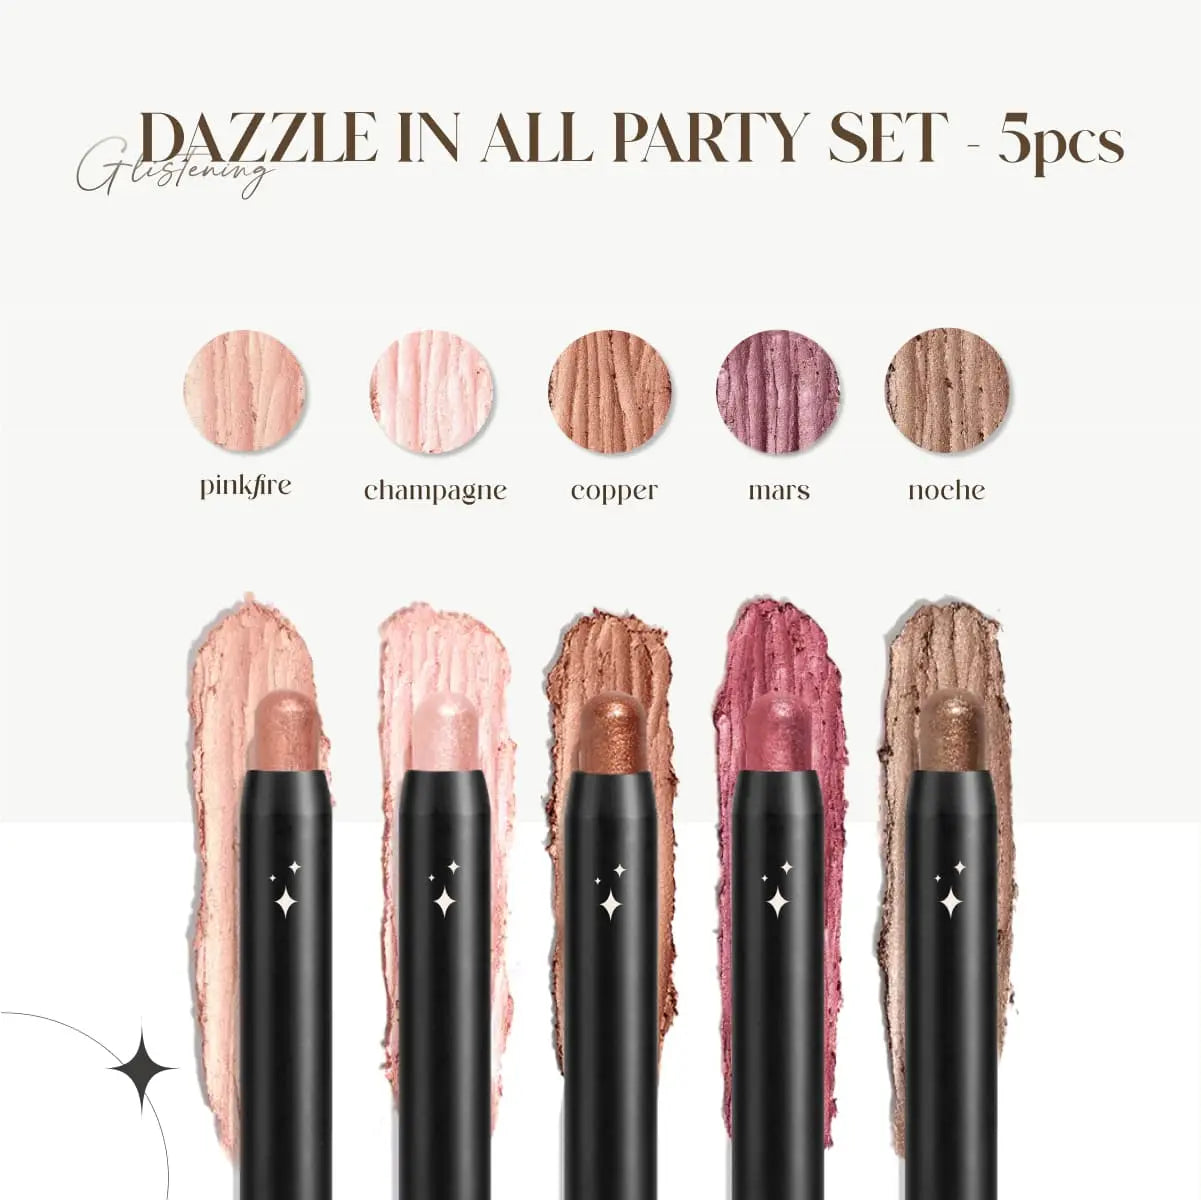 set-dazzle-in-all-party-5 pezzi